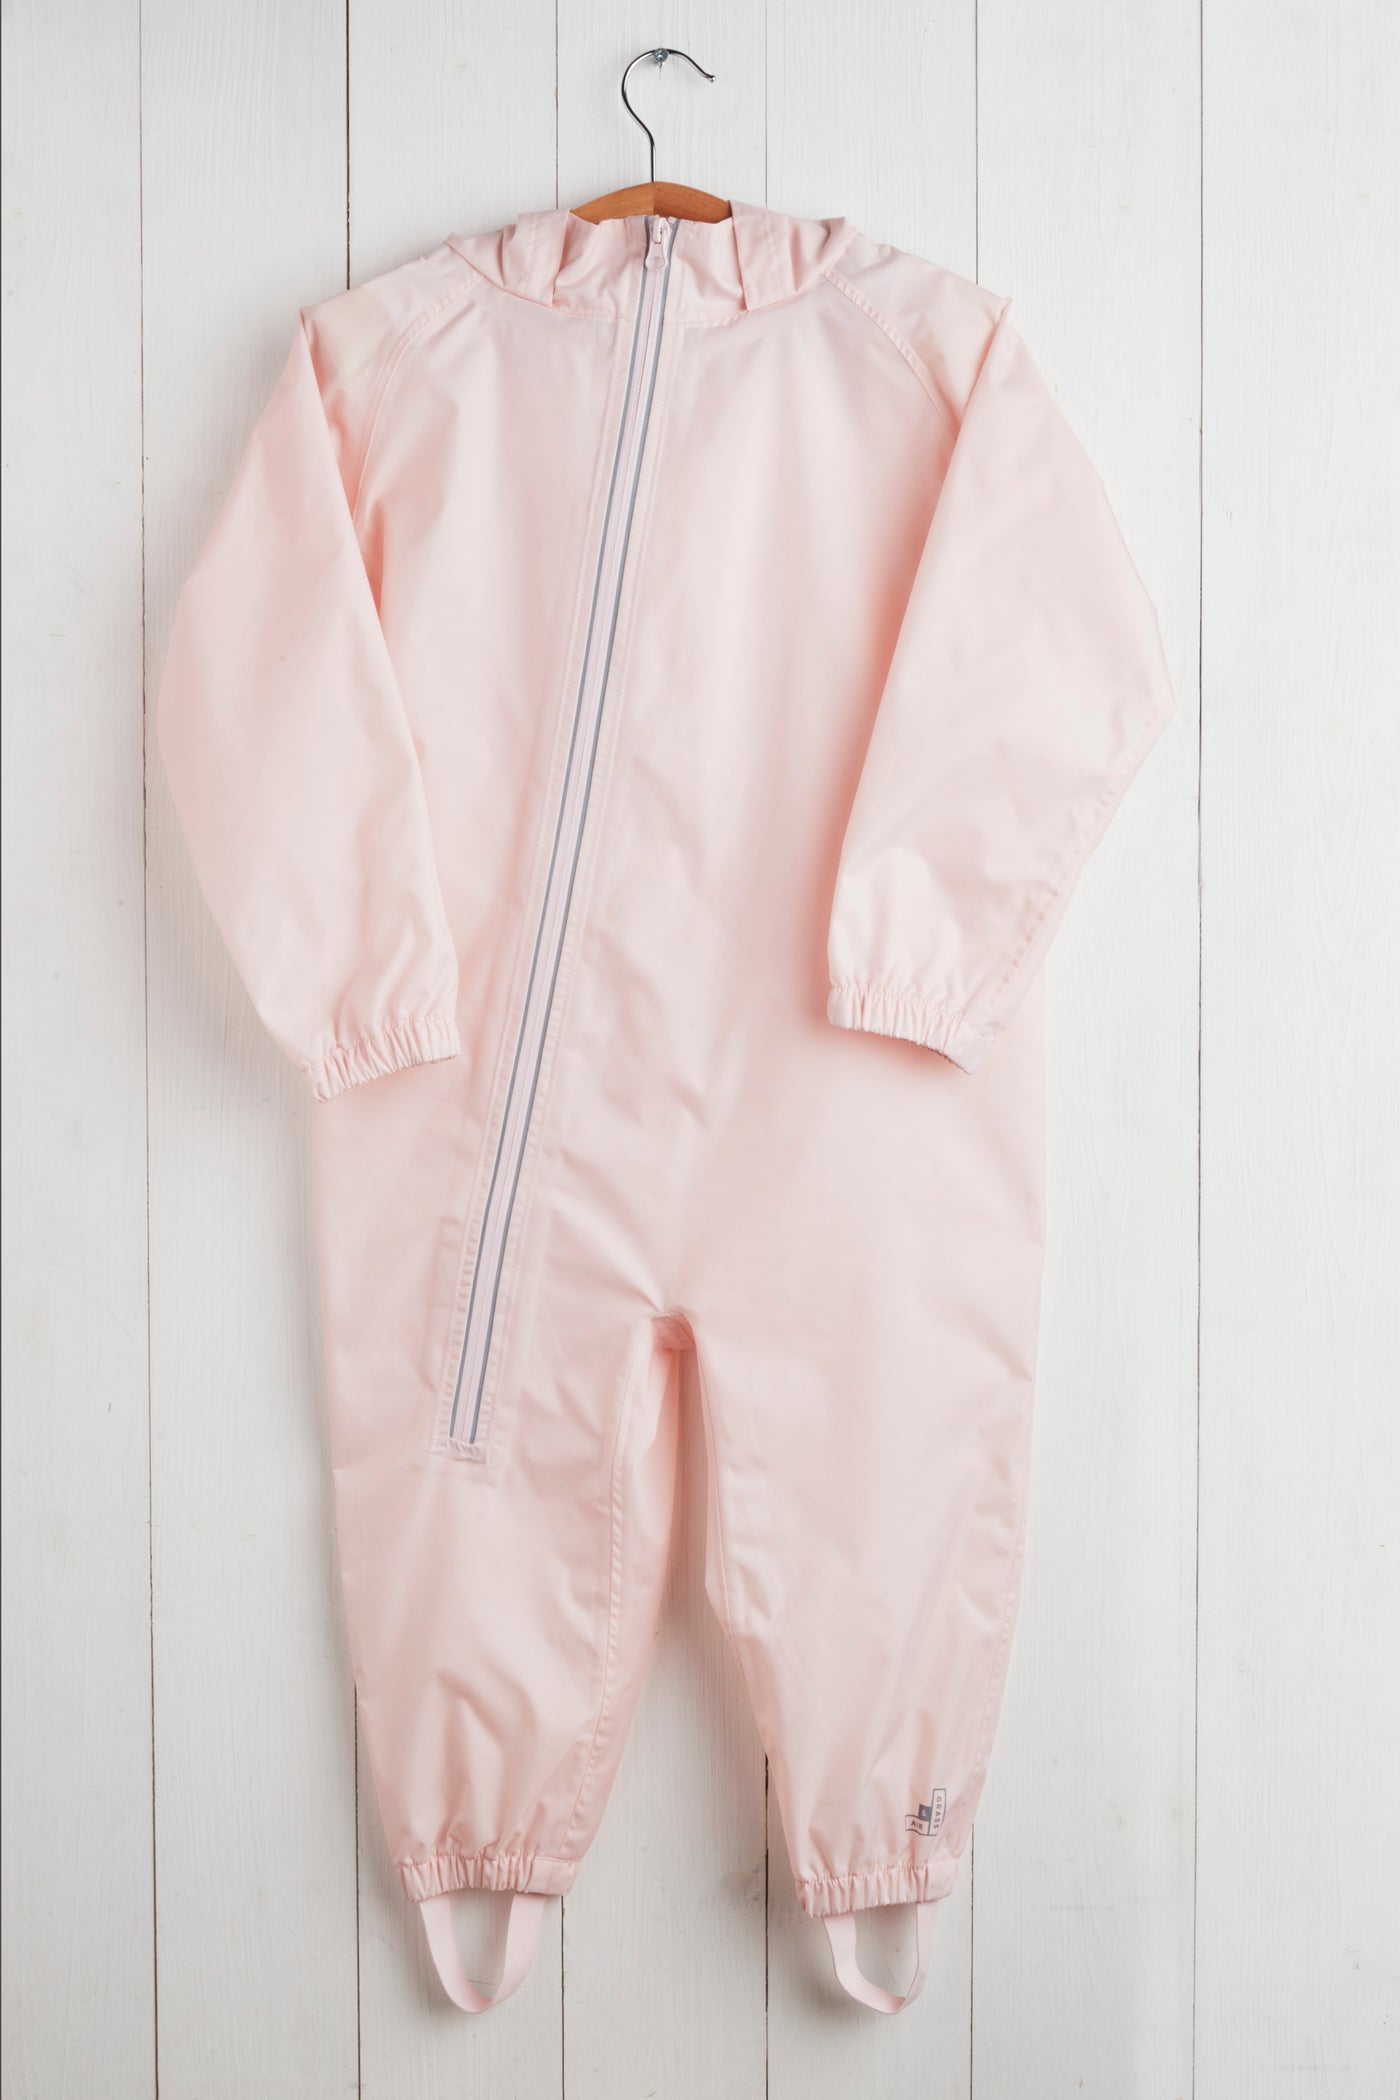 GRASS & AIR - Toddler Puddlesuit in Baby Pink